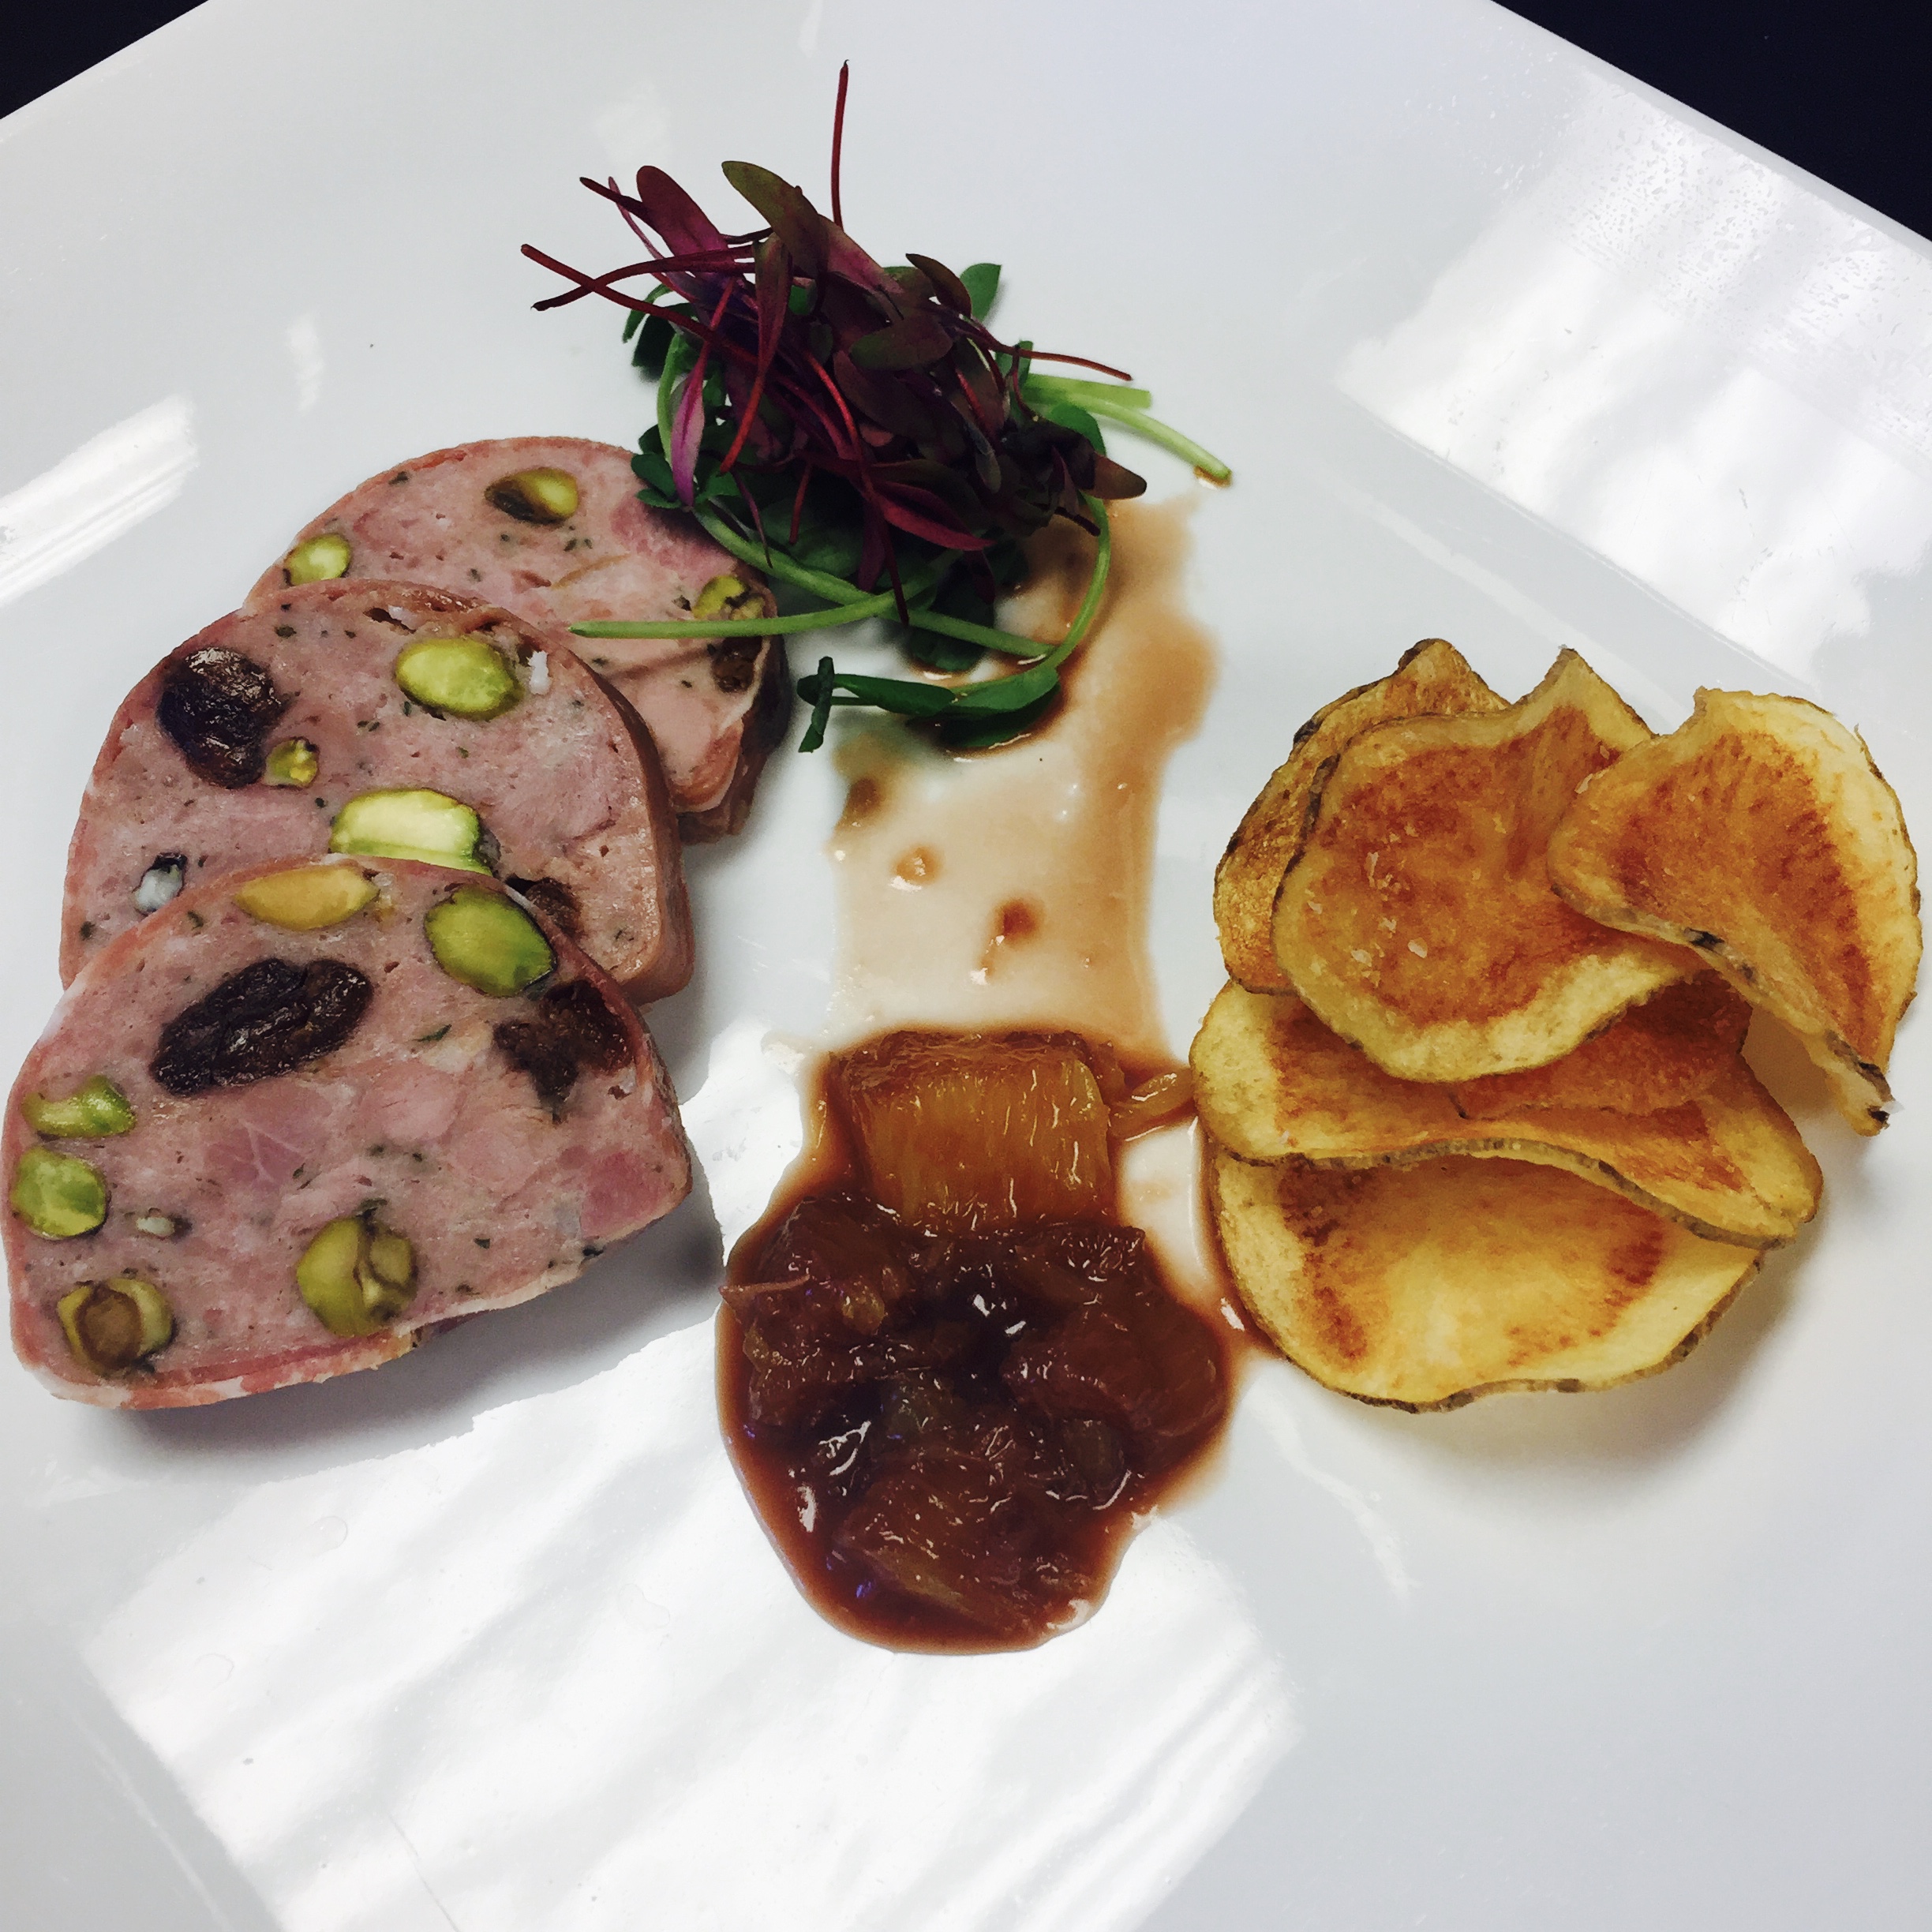 About Pates and Terrines — The Culinary Pro